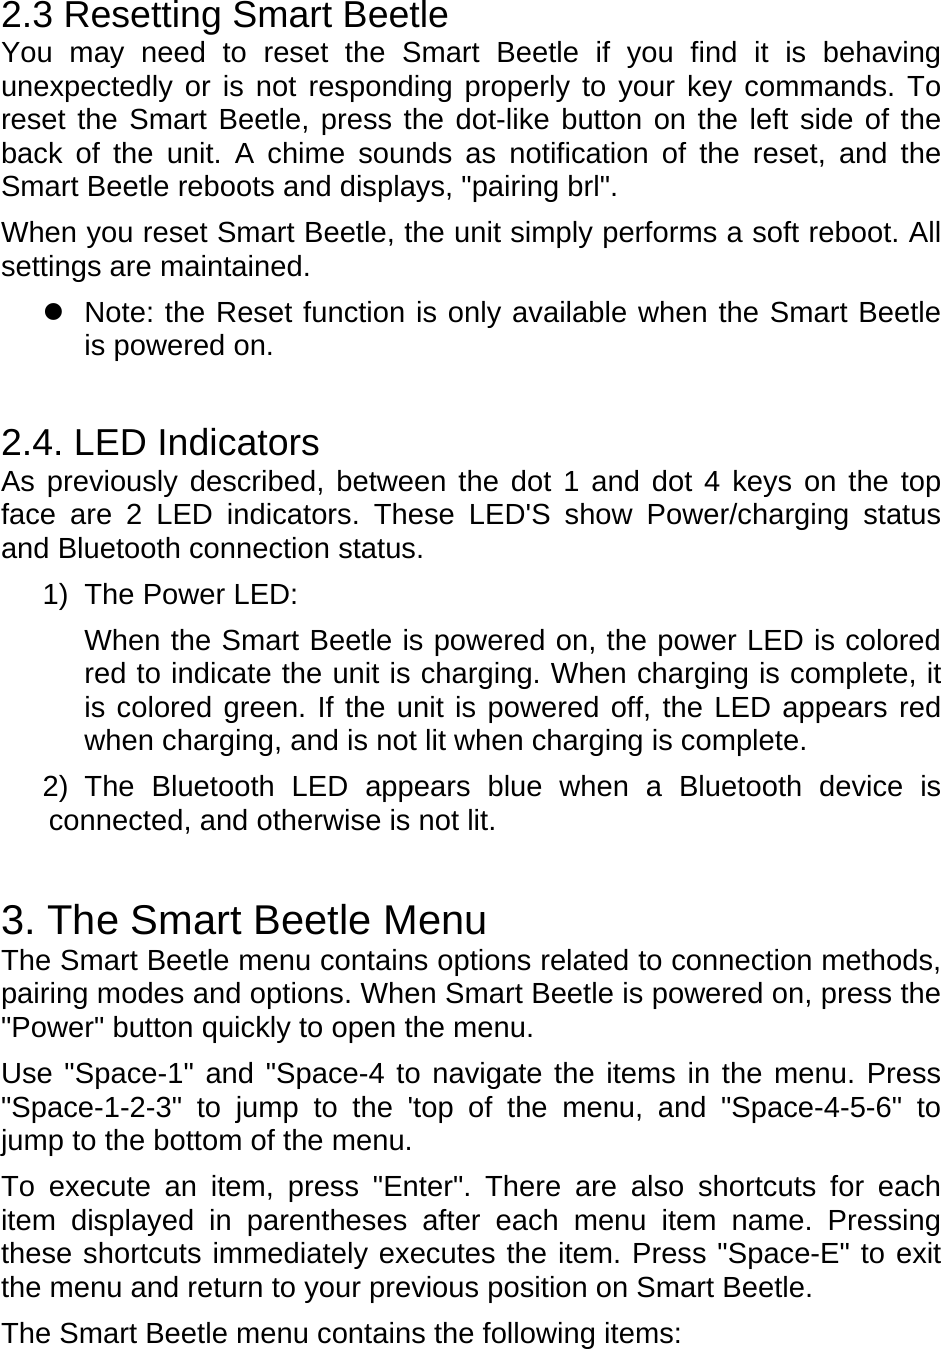 2.3 Resetting Smart Beetle You may need to reset the Smart Beetle if you find it is behaving unexpectedly or is not responding properly to your key commands. To reset the Smart Beetle, press the dot-like button on the left side of the back of the unit. A chime sounds as notification of the reset, and the Smart Beetle reboots and displays, &quot;pairing brl&quot;.   When you reset Smart Beetle, the unit simply performs a soft reboot. All settings are maintained.     Note: the Reset function is only available when the Smart Beetle is powered on.  2.4. LED Indicators As previously described, between the dot 1 and dot 4 keys on the top face are 2 LED indicators. These LED&apos;S show Power/charging status and Bluetooth connection status. 1)  The Power LED: When the Smart Beetle is powered on, the power LED is colored red to indicate the unit is charging. When charging is complete, it is colored green. If the unit is powered off, the LED appears red when charging, and is not lit when charging is complete. 2) The Bluetooth LED appears blue when a Bluetooth device is connected, and otherwise is not lit.  3. The Smart Beetle Menu The Smart Beetle menu contains options related to connection methods, pairing modes and options. When Smart Beetle is powered on, press the &quot;Power&quot; button quickly to open the menu. Use &quot;Space-1&quot; and &quot;Space-4 to navigate the items in the menu. Press &quot;Space-1-2-3&quot; to jump to the &apos;top of the menu, and &quot;Space-4-5-6&quot; to jump to the bottom of the menu.   To execute an item, press &quot;Enter&quot;. There are also shortcuts for each item displayed in parentheses after each menu item name. Pressing these shortcuts immediately executes the item. Press &quot;Space-E&quot; to exit the menu and return to your previous position on Smart Beetle. The Smart Beetle menu contains the following items: 